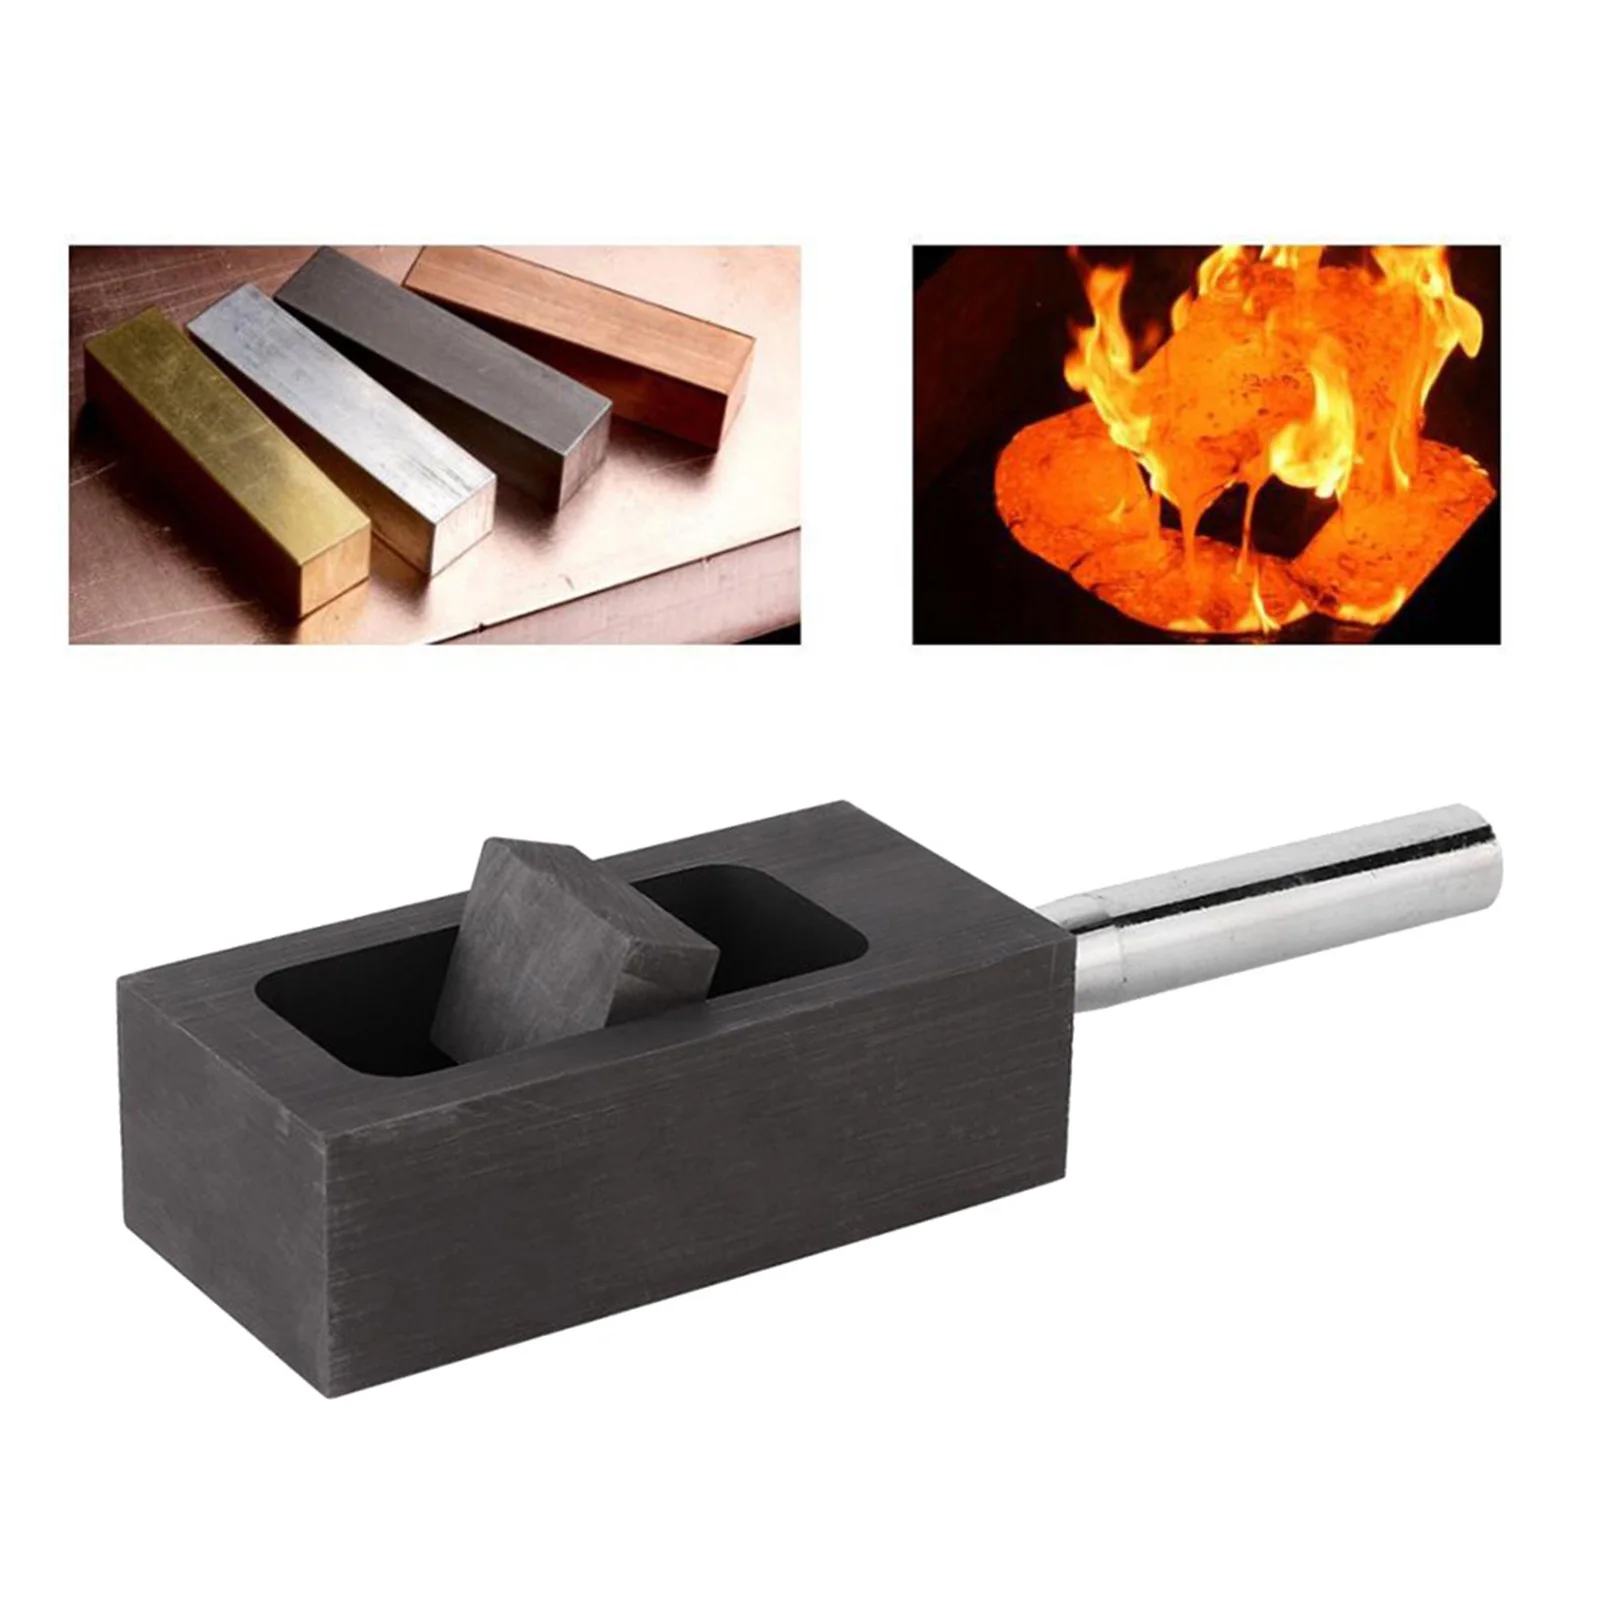 5 Kg Graphite Ingot Mold Graphite Crucible for Melting Gold Silver Casting Refining DIY Jewelry Finding